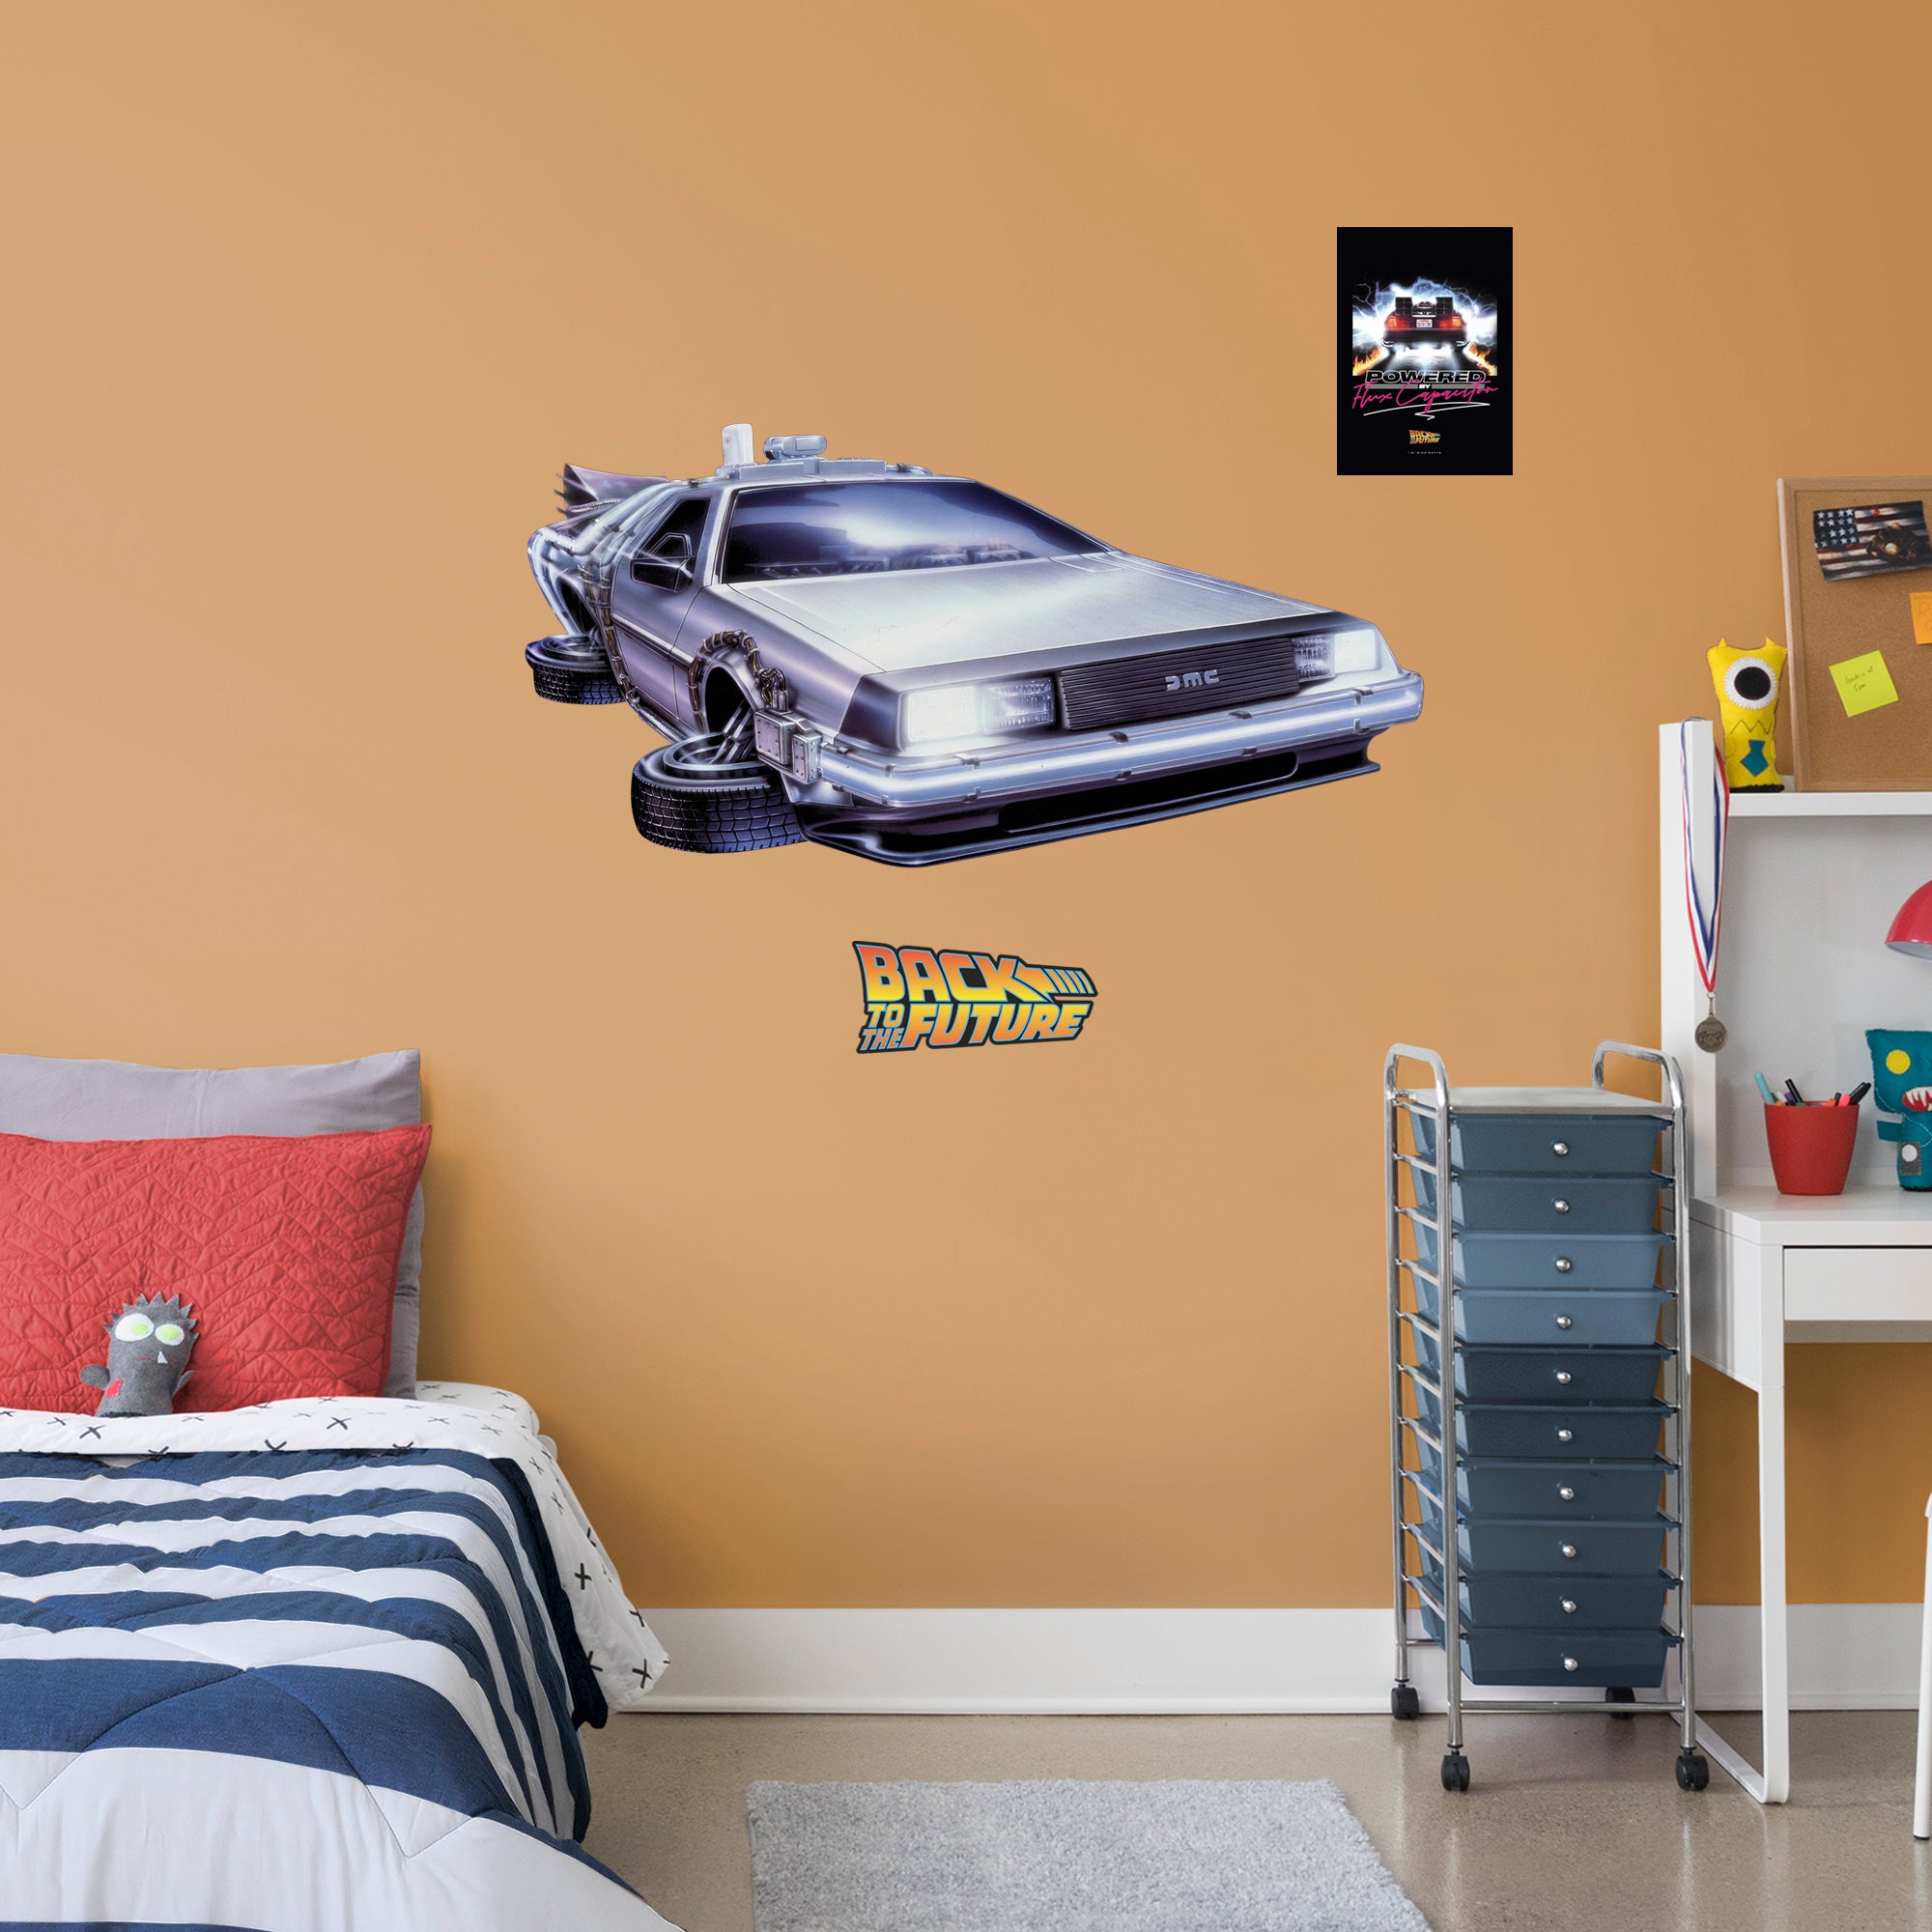 Back to the Future DeLorean Time Machine II Officially Licensed NBC Universal Removable Wall Decal Giant + 2 Decals by Fathead |